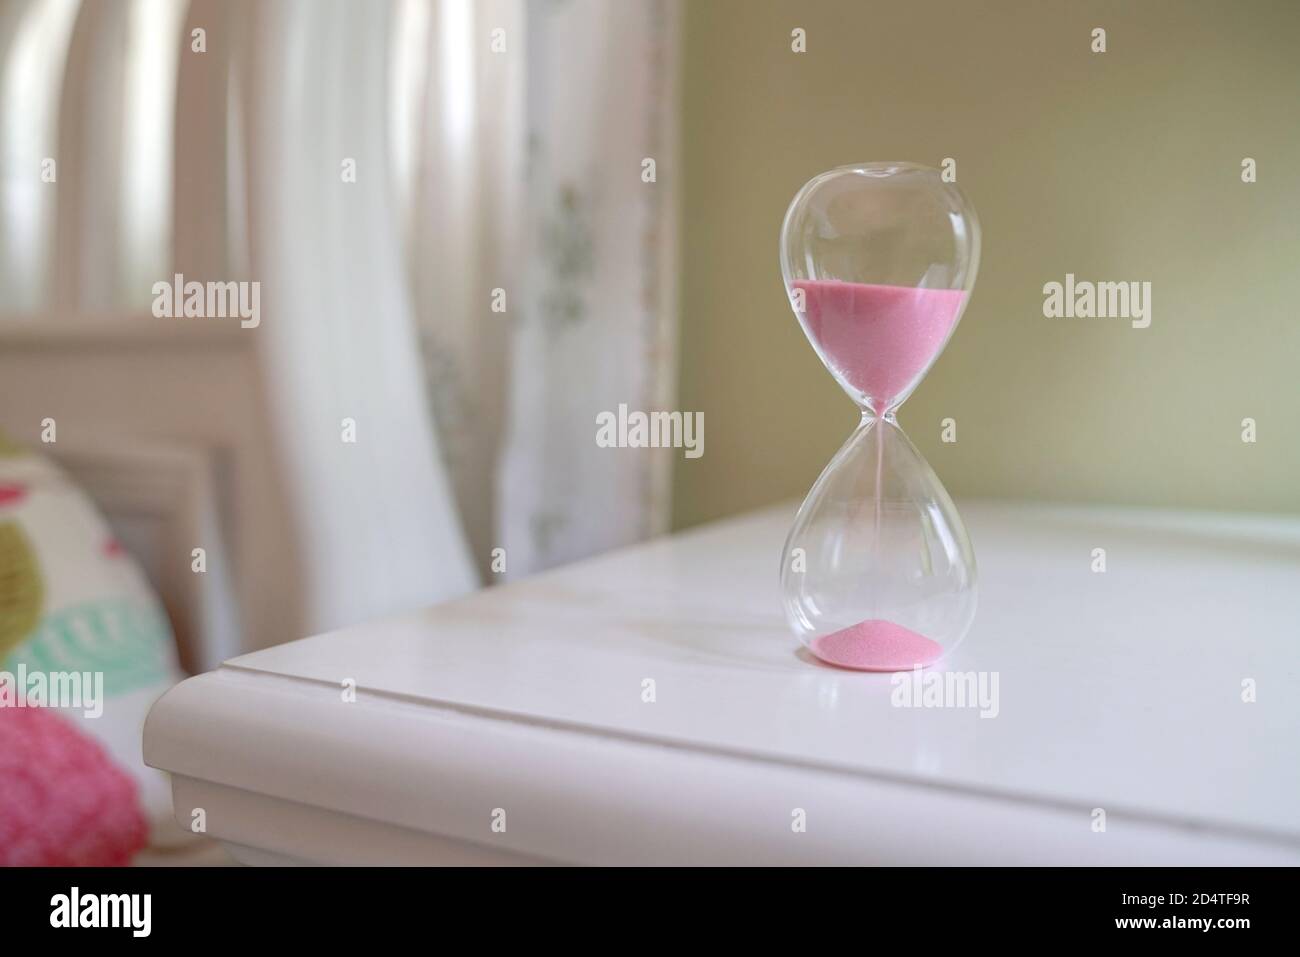 Sand glass on table next to bed. Measuring time passing, countdown or daily routine concept. Stock Photo